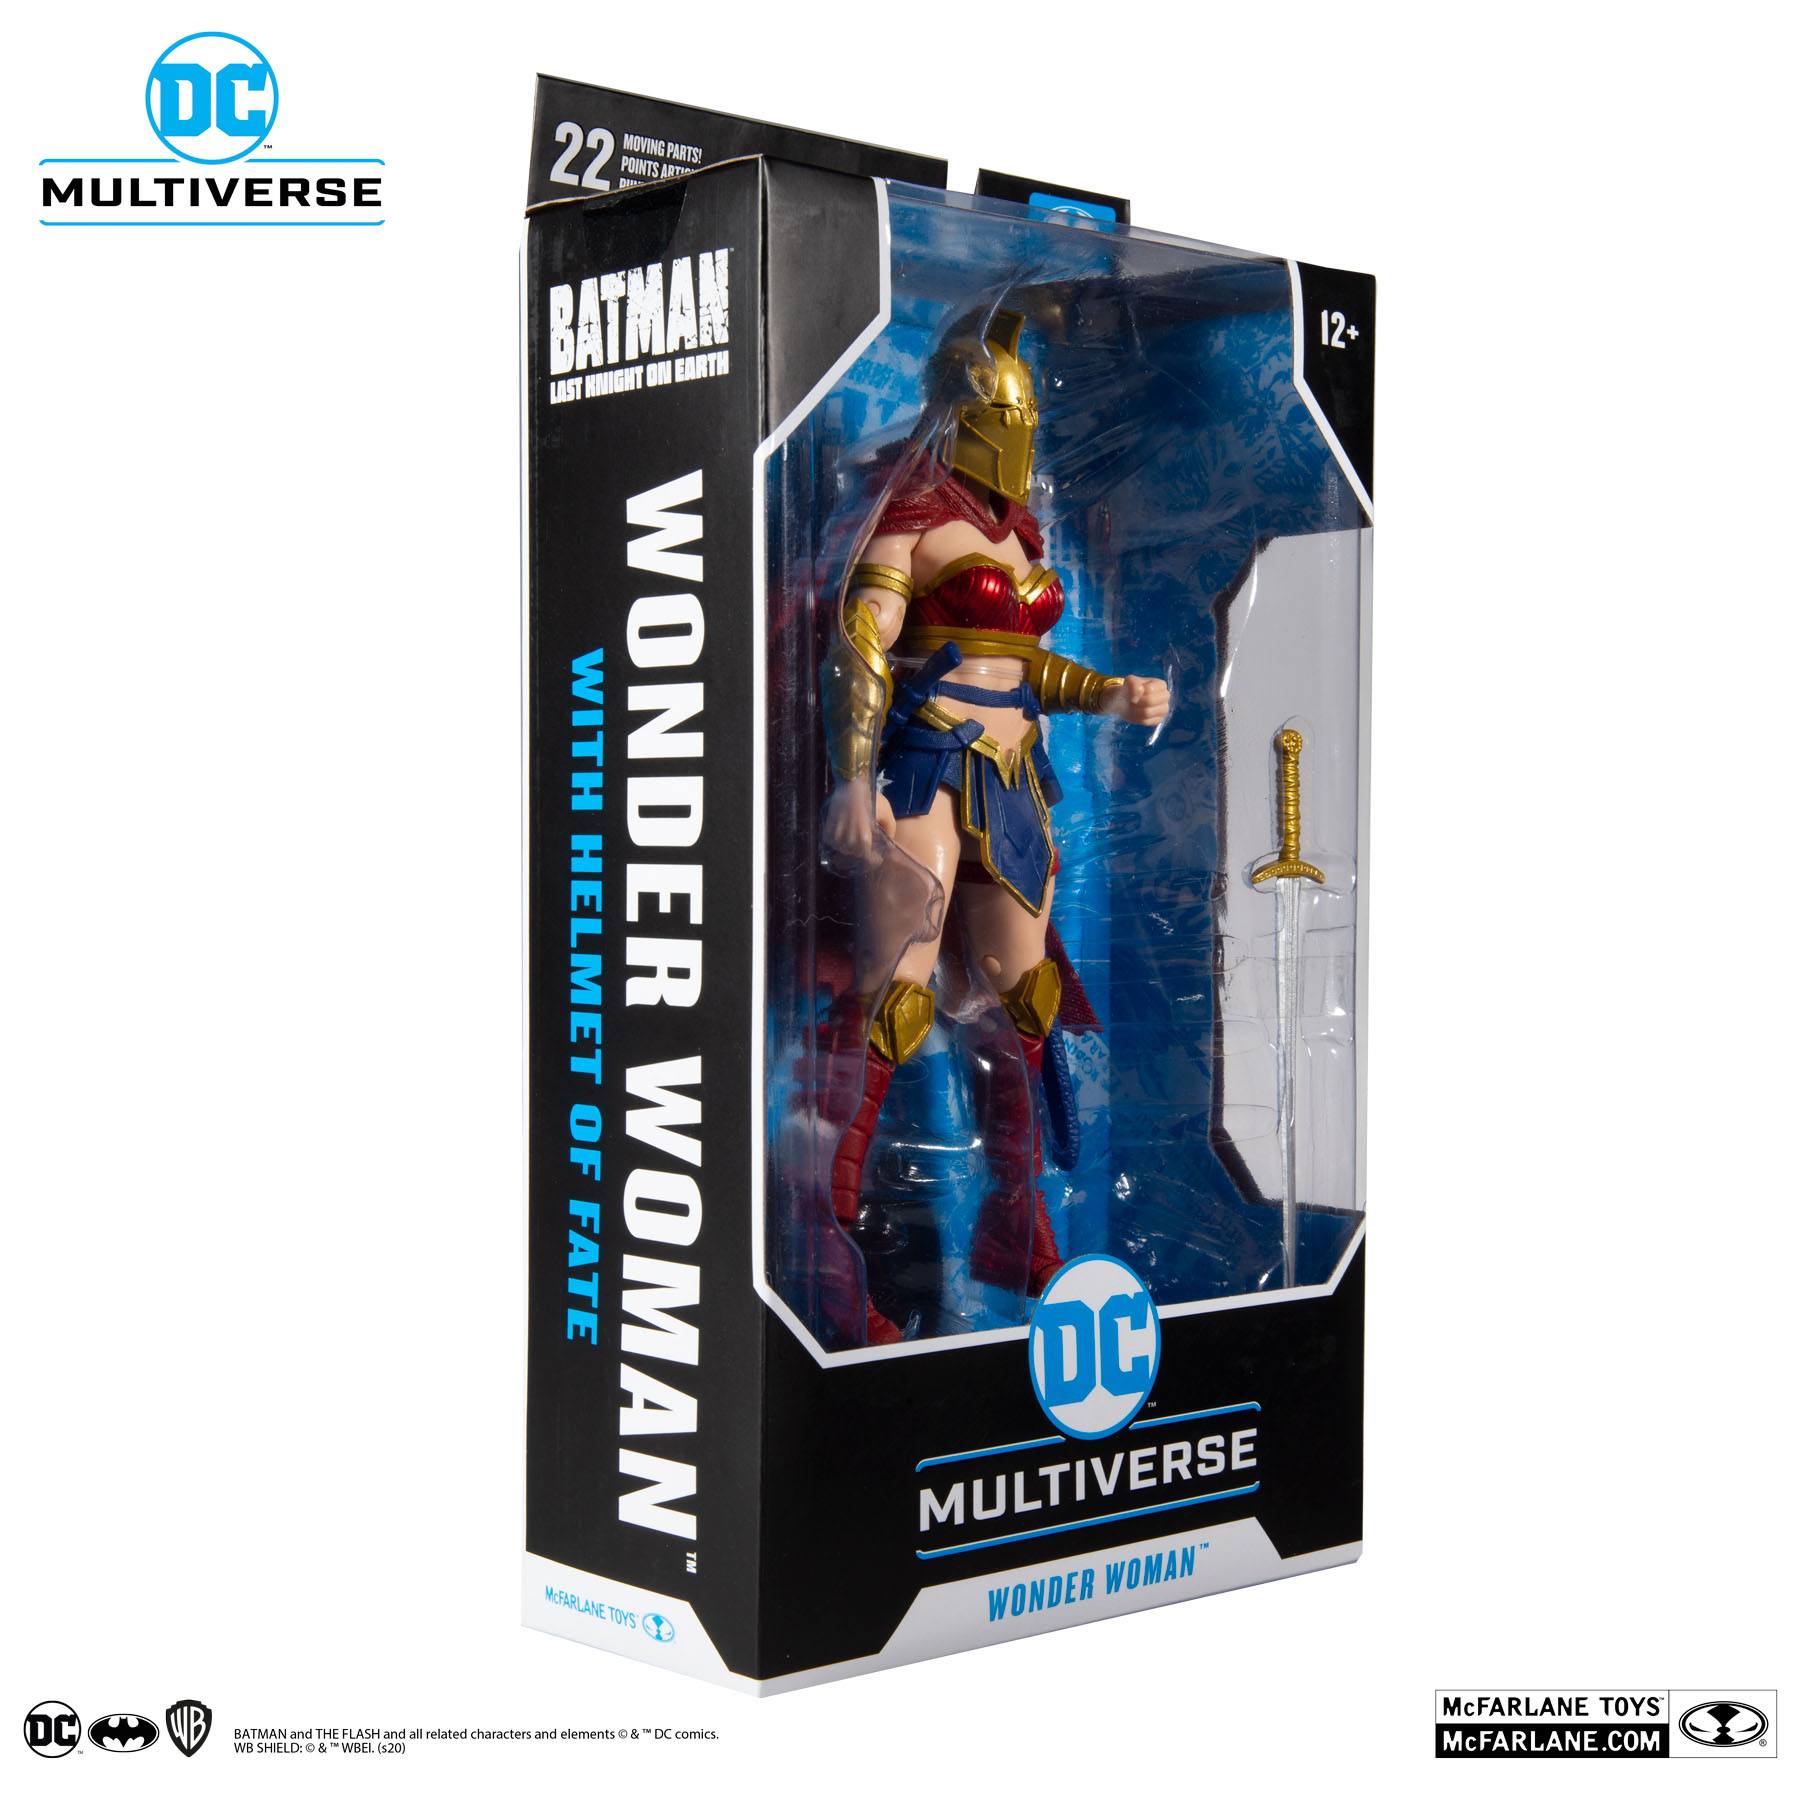 DC Multiverse Actionfigur LKOE Wonder Woman with Helmet of Fate 18 cm MCF15175-6 787926151756